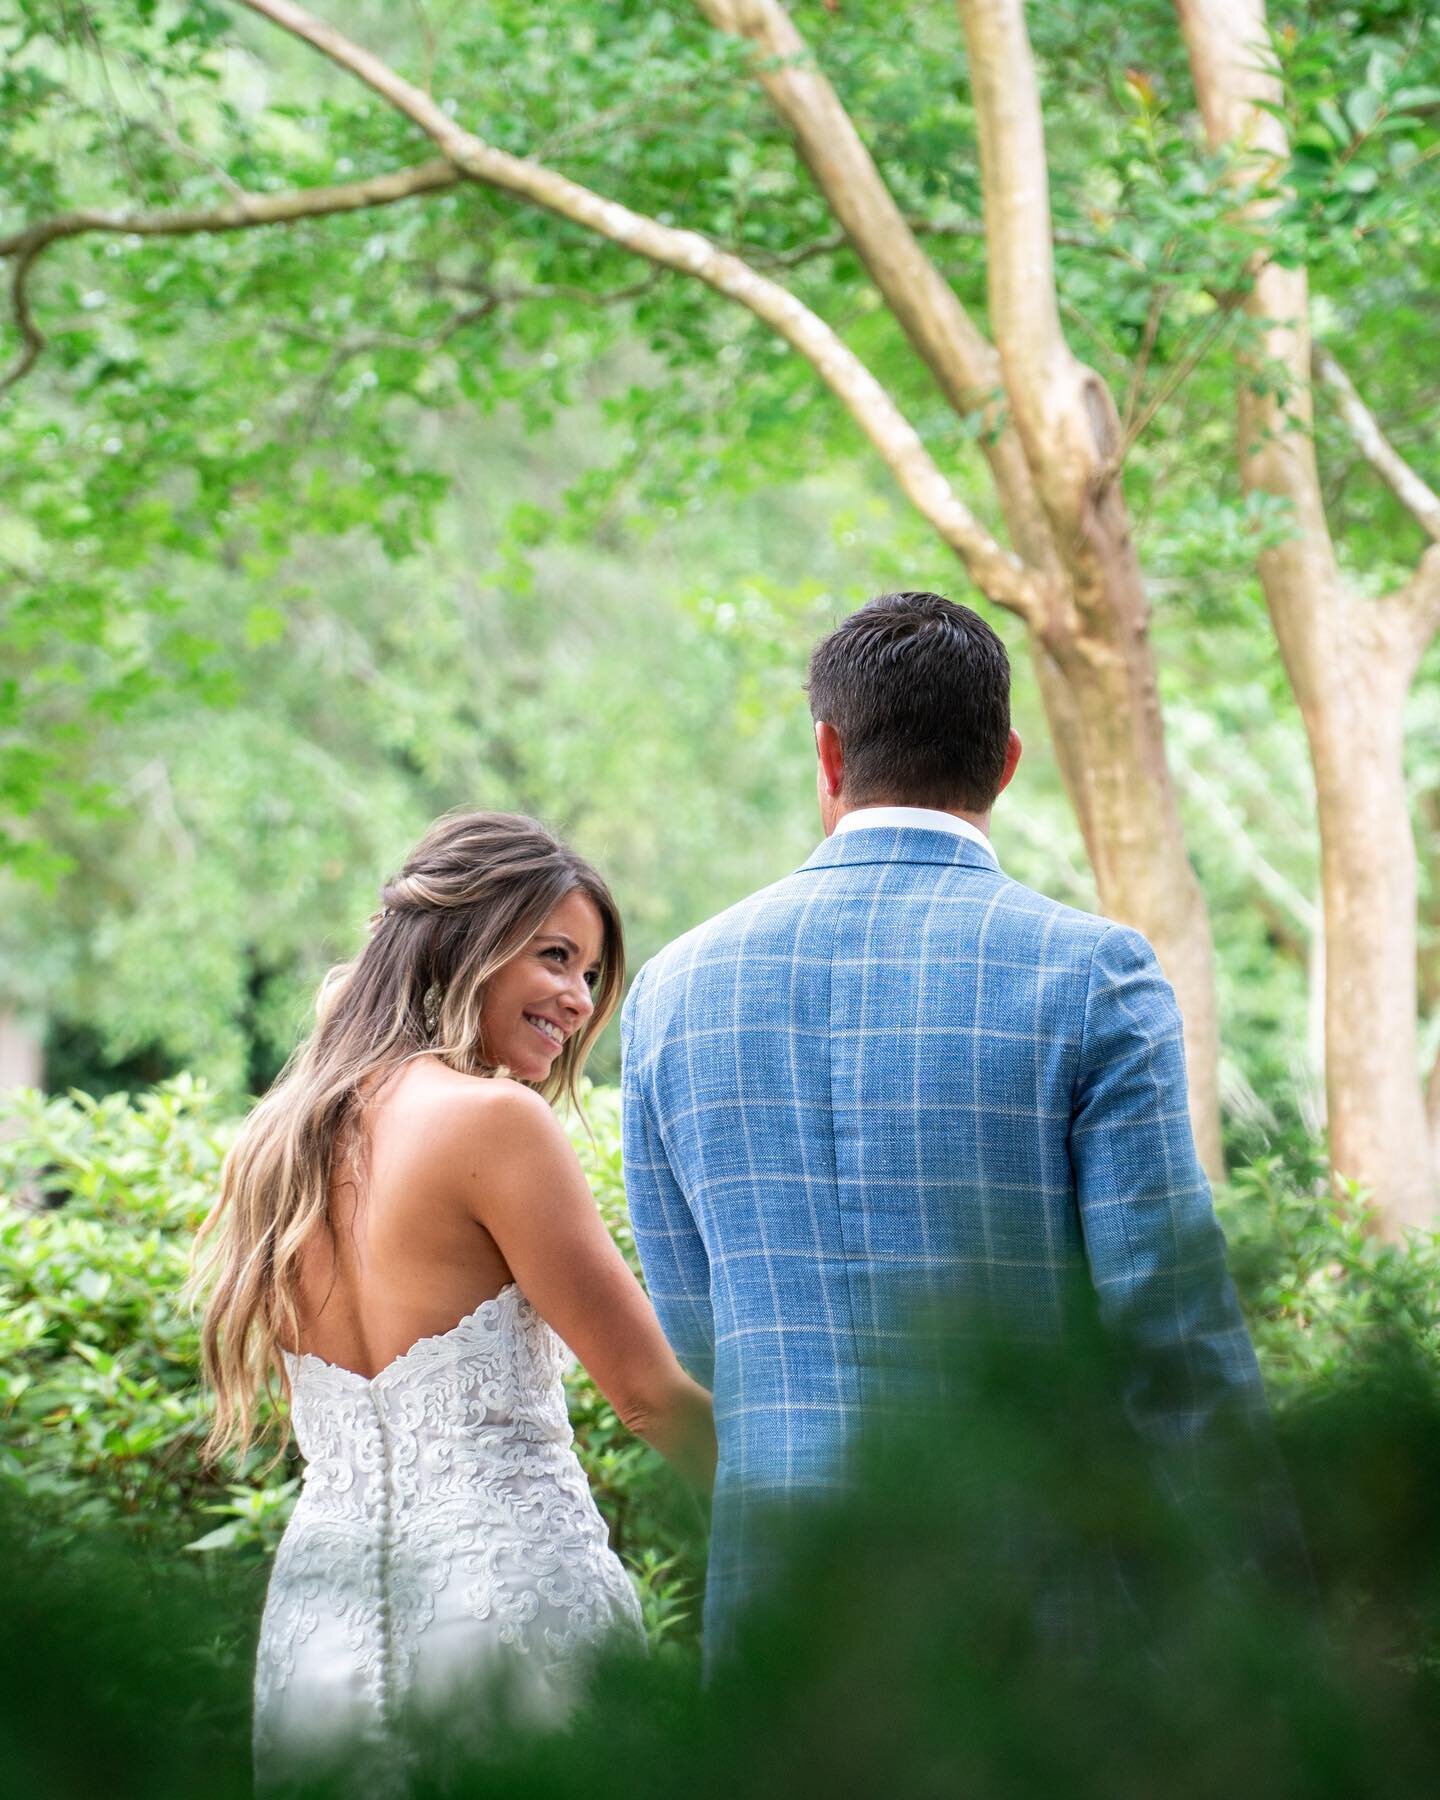 Cheers to love, laughter, and forever! We had the best time celebrating Stephanie and Wayne&rsquo;s future together at their beautiful elopement 🎉

Photos by: Summer

Location: @kenanchapelatlandfall 

#kenanchapelatlandfall #landfallchapel #wilming